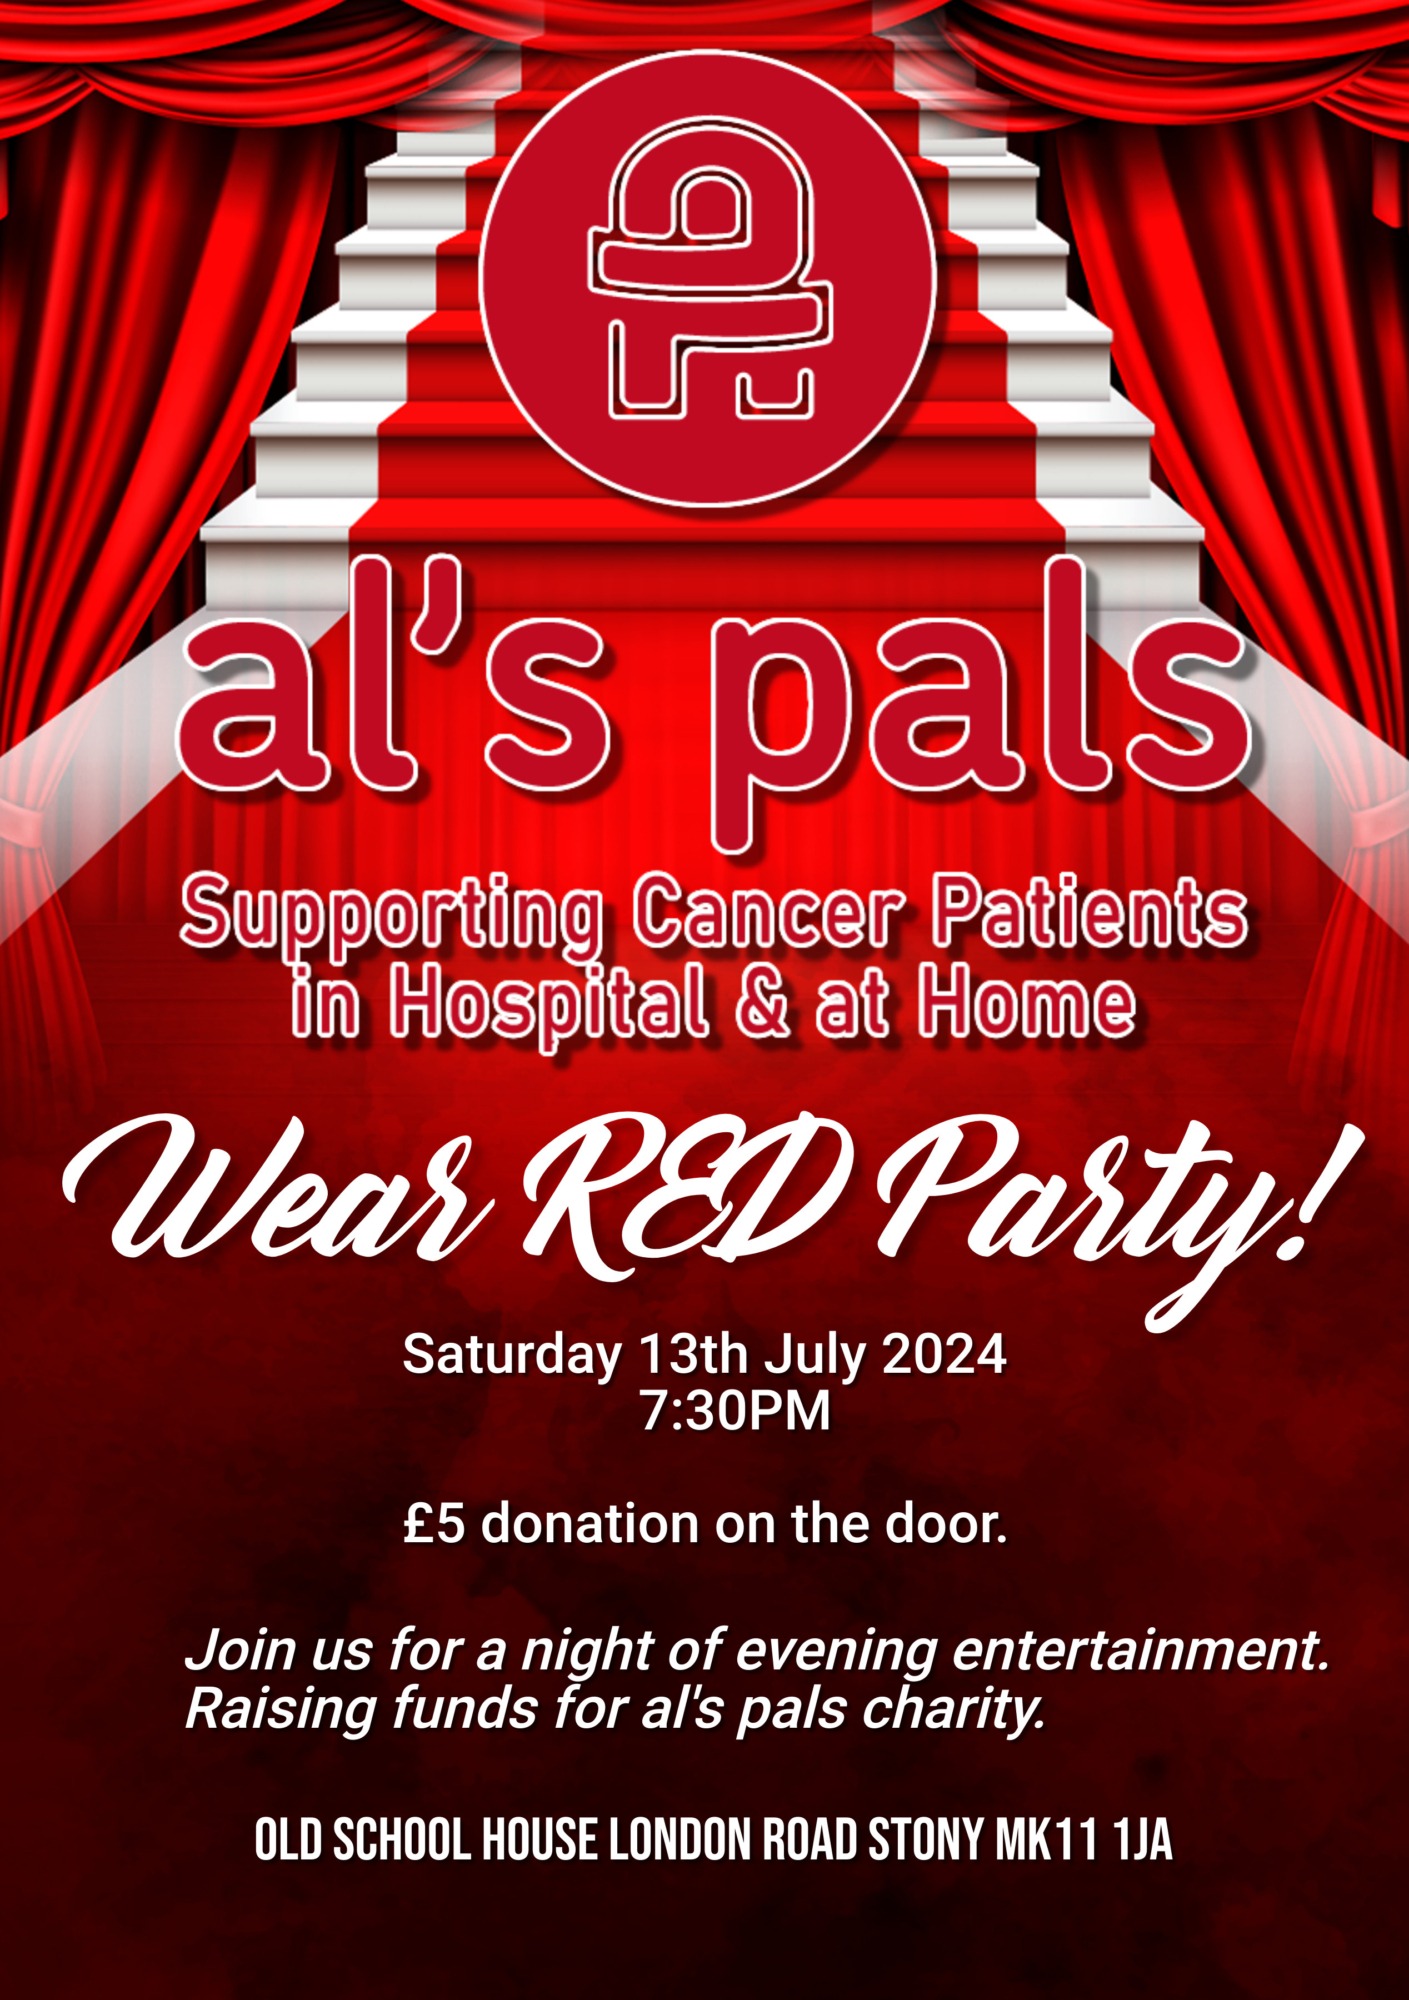 Als pals wear red party Saturday 13th July on our wear red for AL day at stony | Northamptonshire Chamber of Commerce